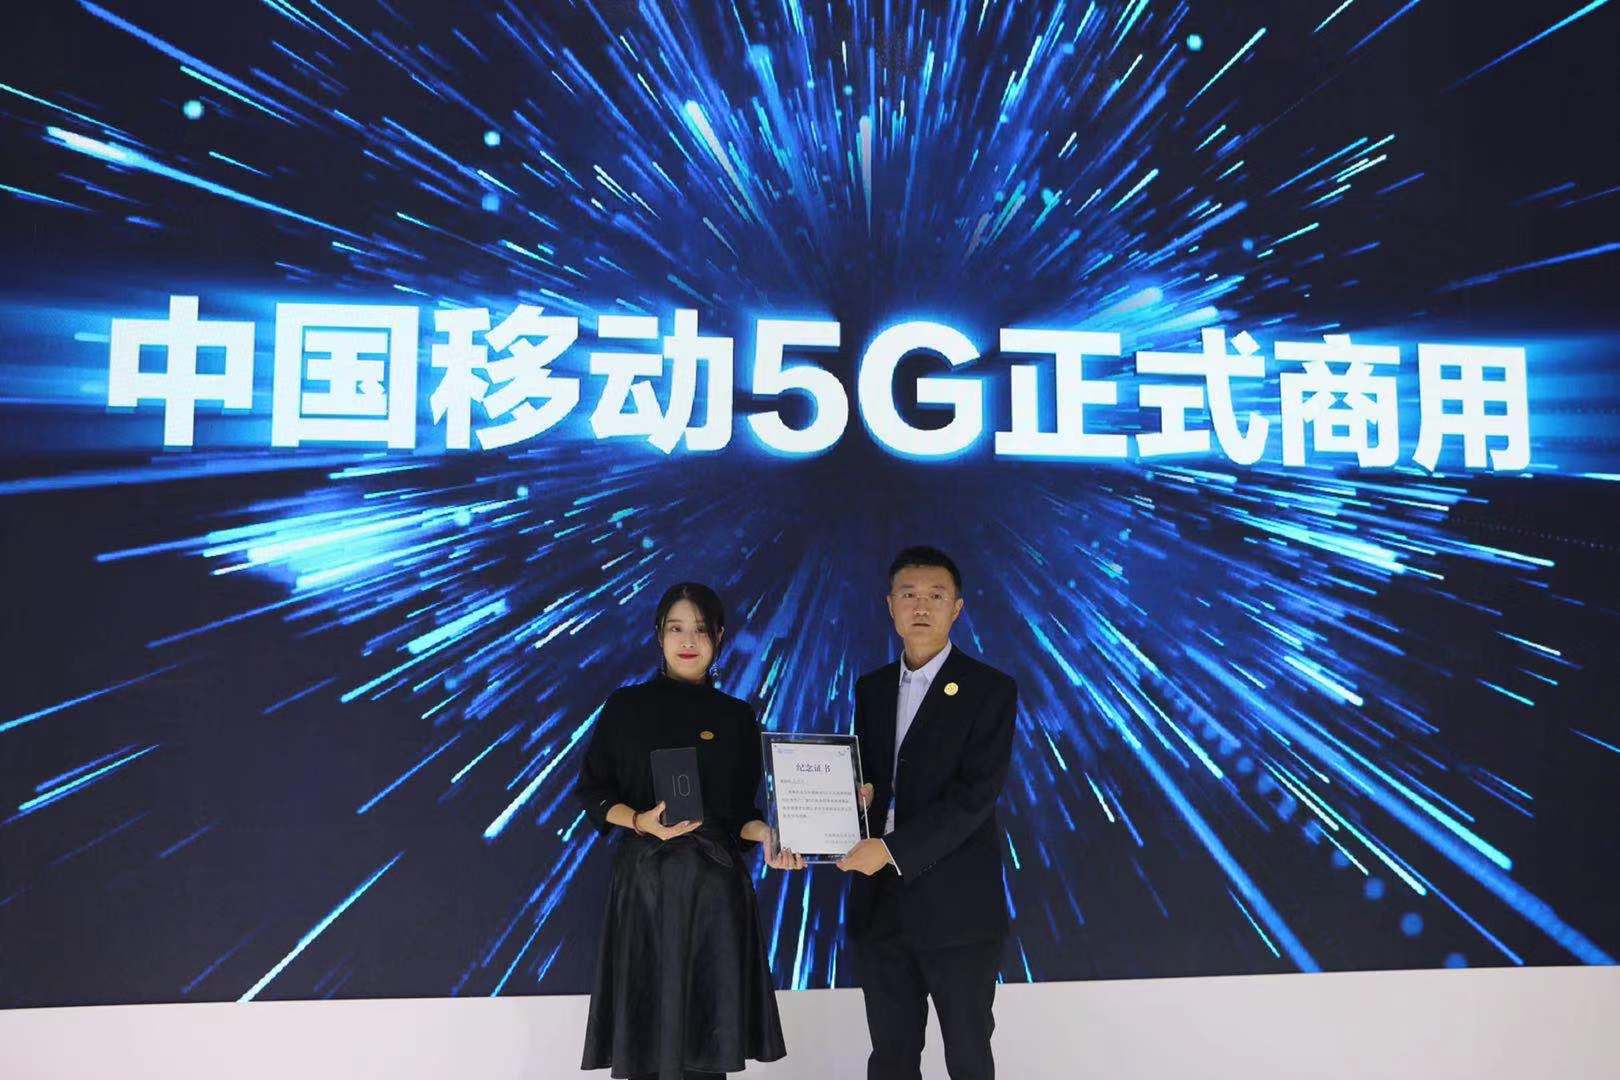 Chinese users can officially use 5G network since this Halloween